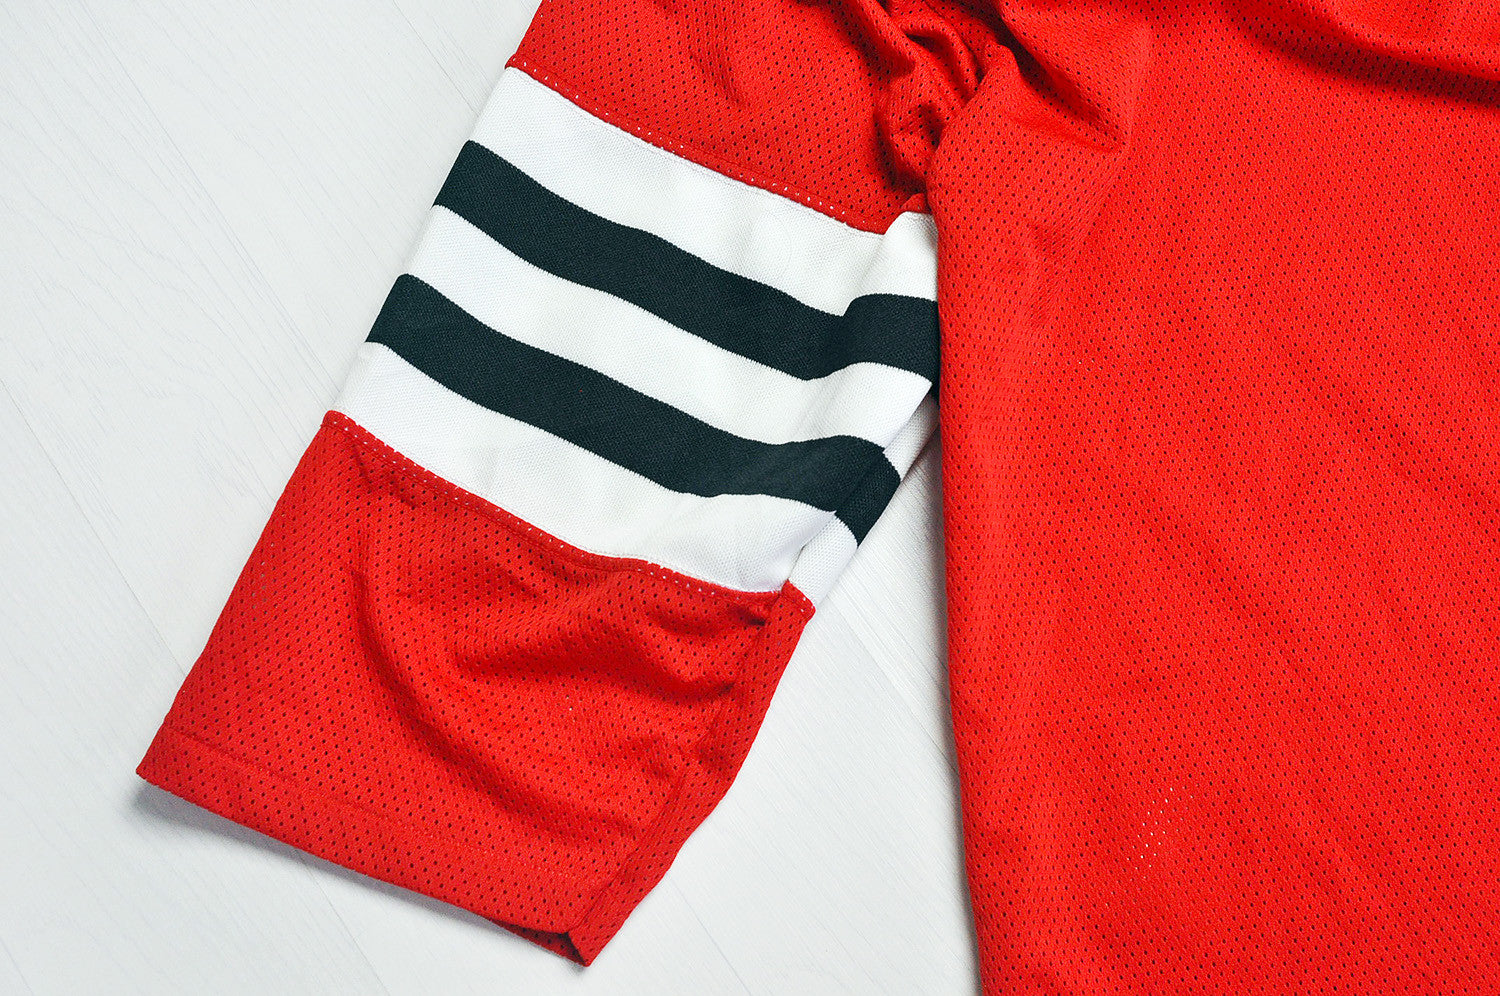 Vintage White & Black Stripped Sleeve Mesh Red Jersey Top